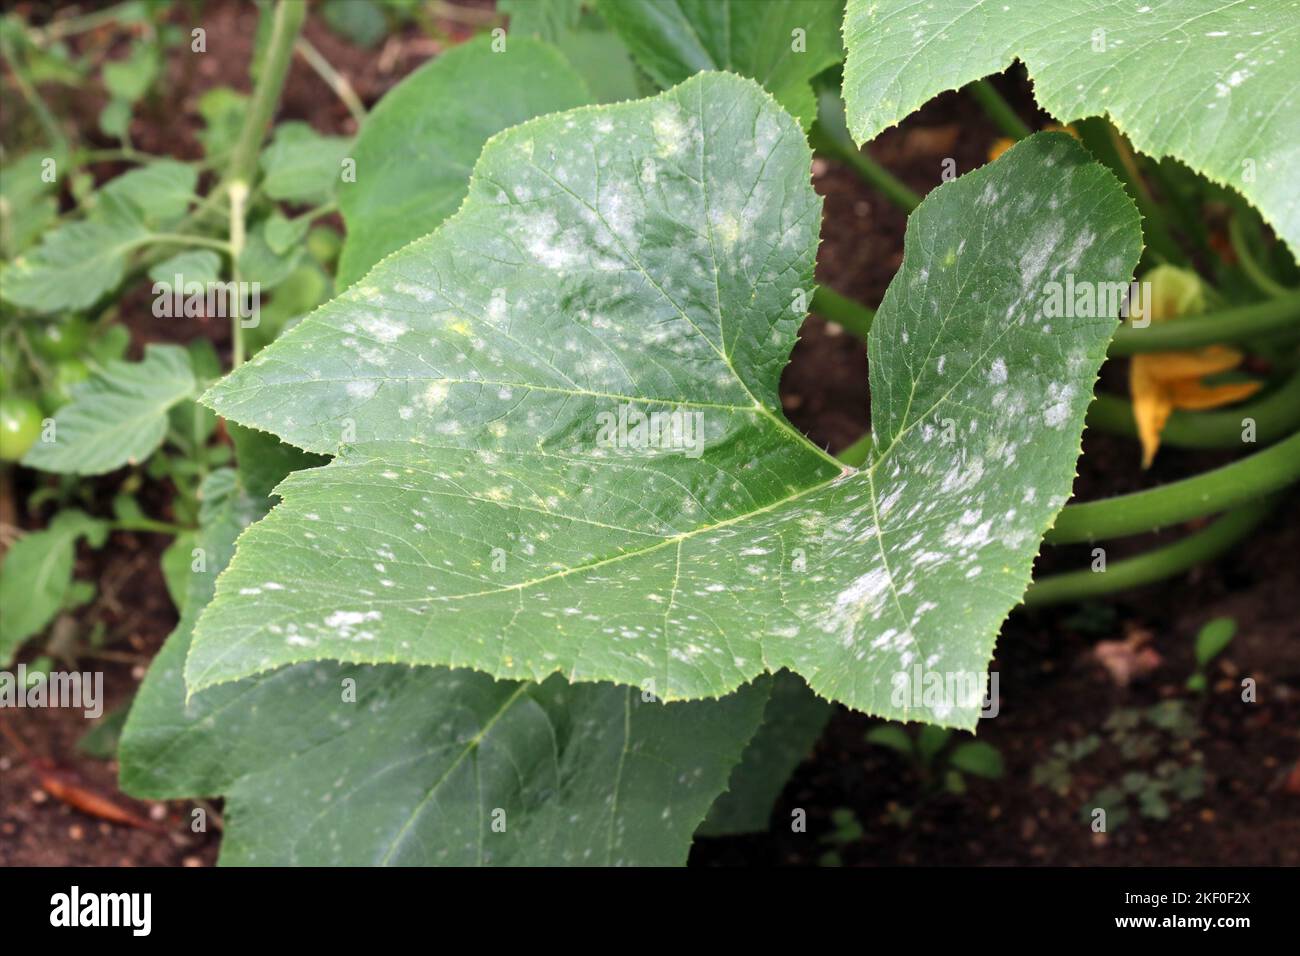 Fungal plant disease Powdery Mildew on a pattypan squash leaf (pattypan, scallop squash, patisson). White plaque on the leaf. Infected plant. Stock Photo